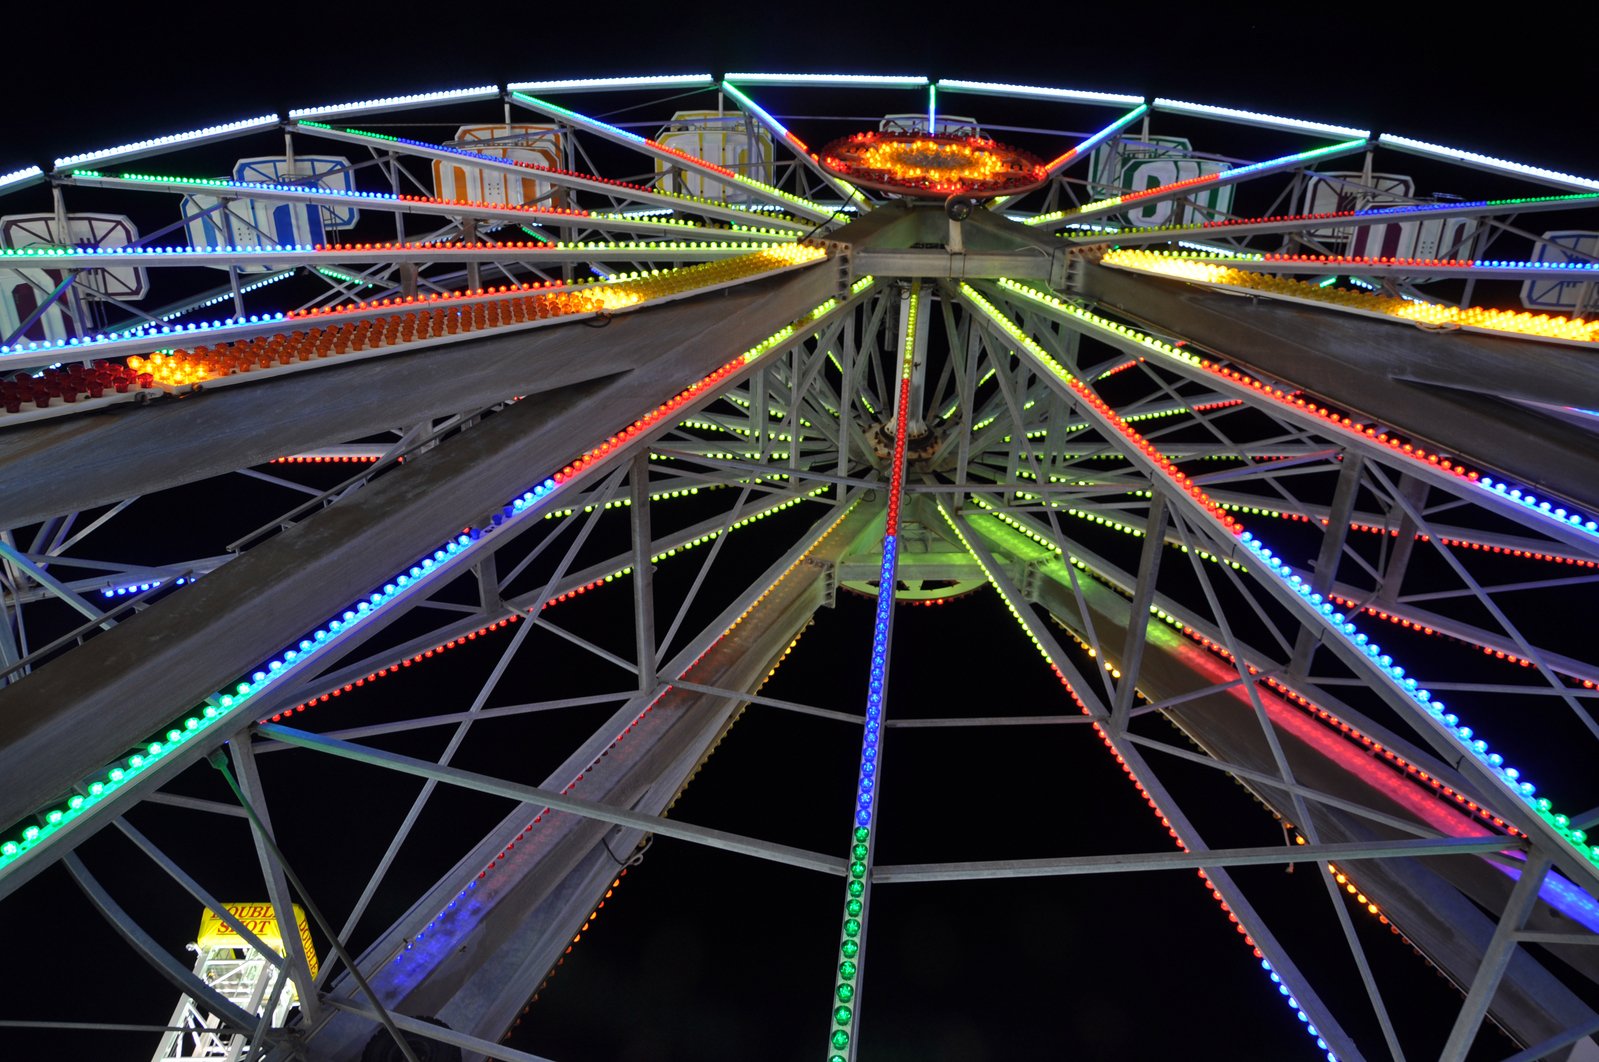 colorful ferris wheel is lit up at night time